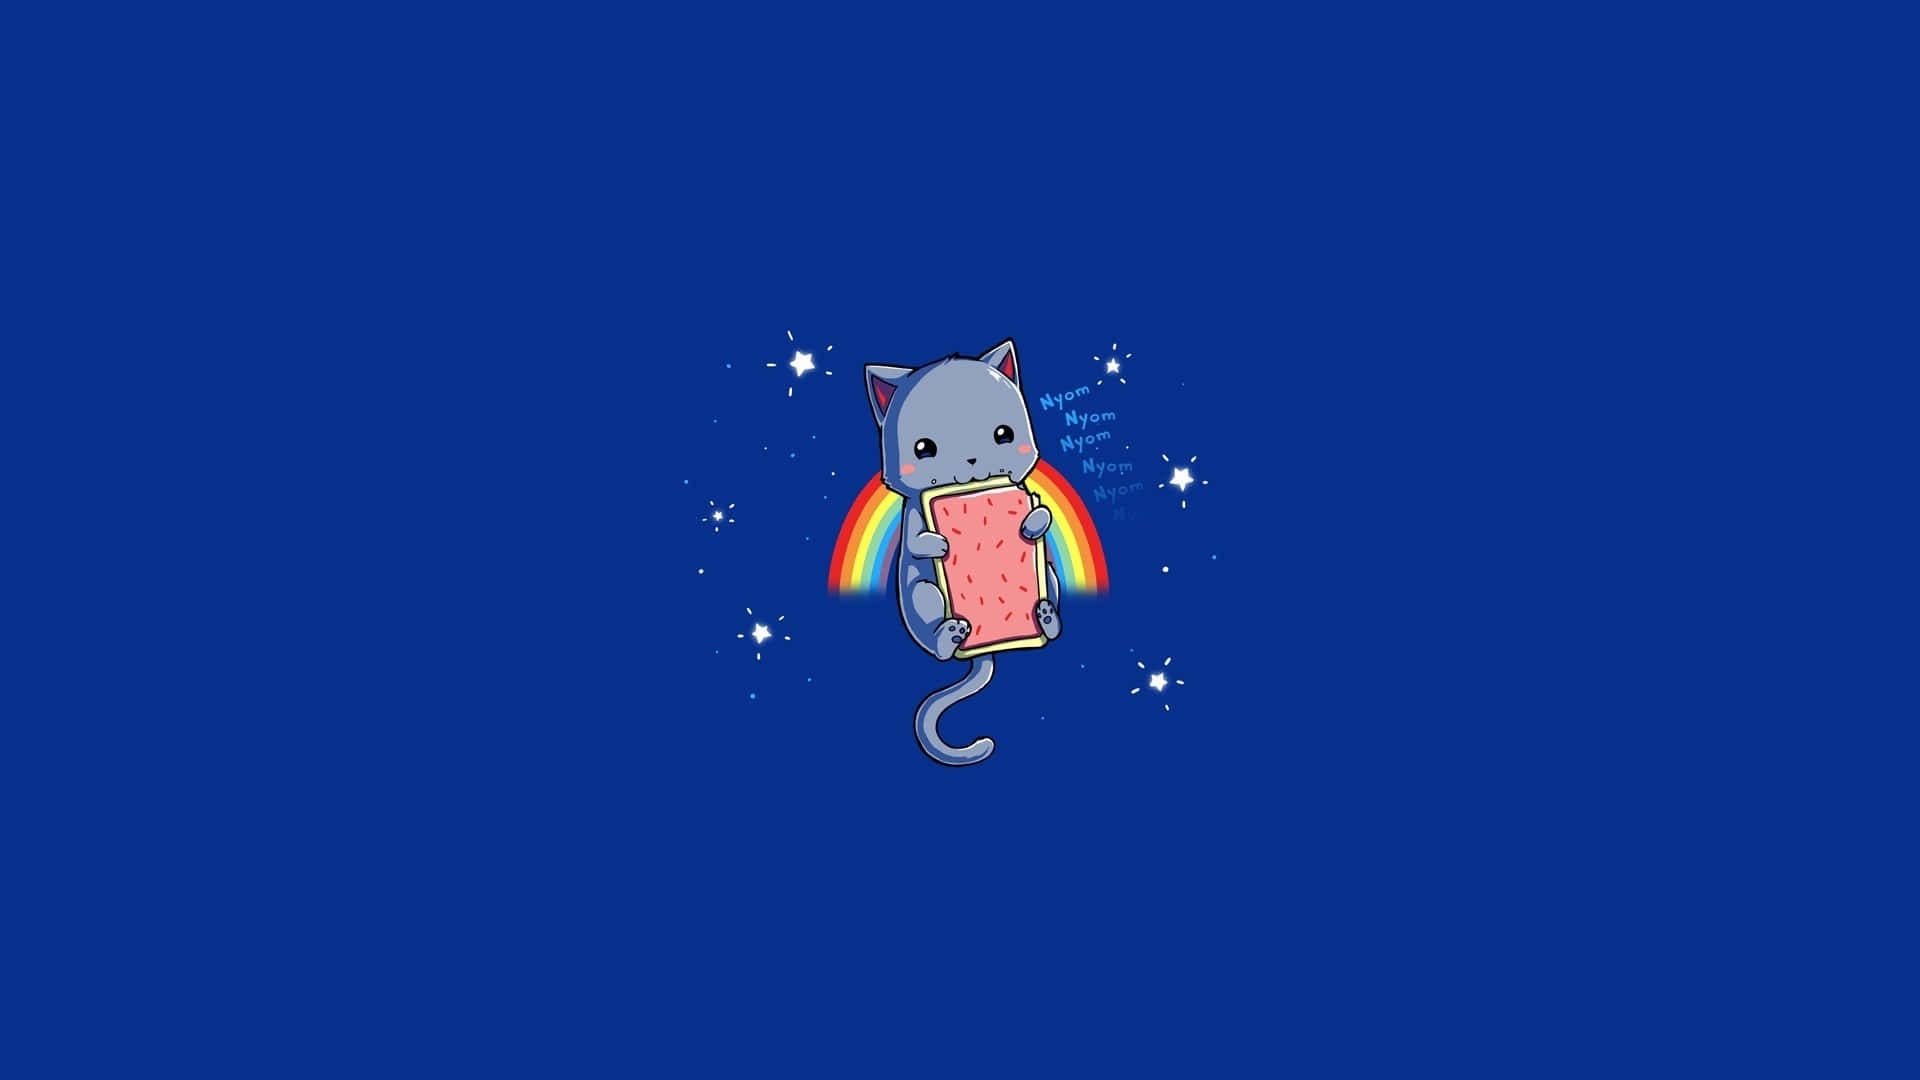 Nyan Cat taking over the Galaxy